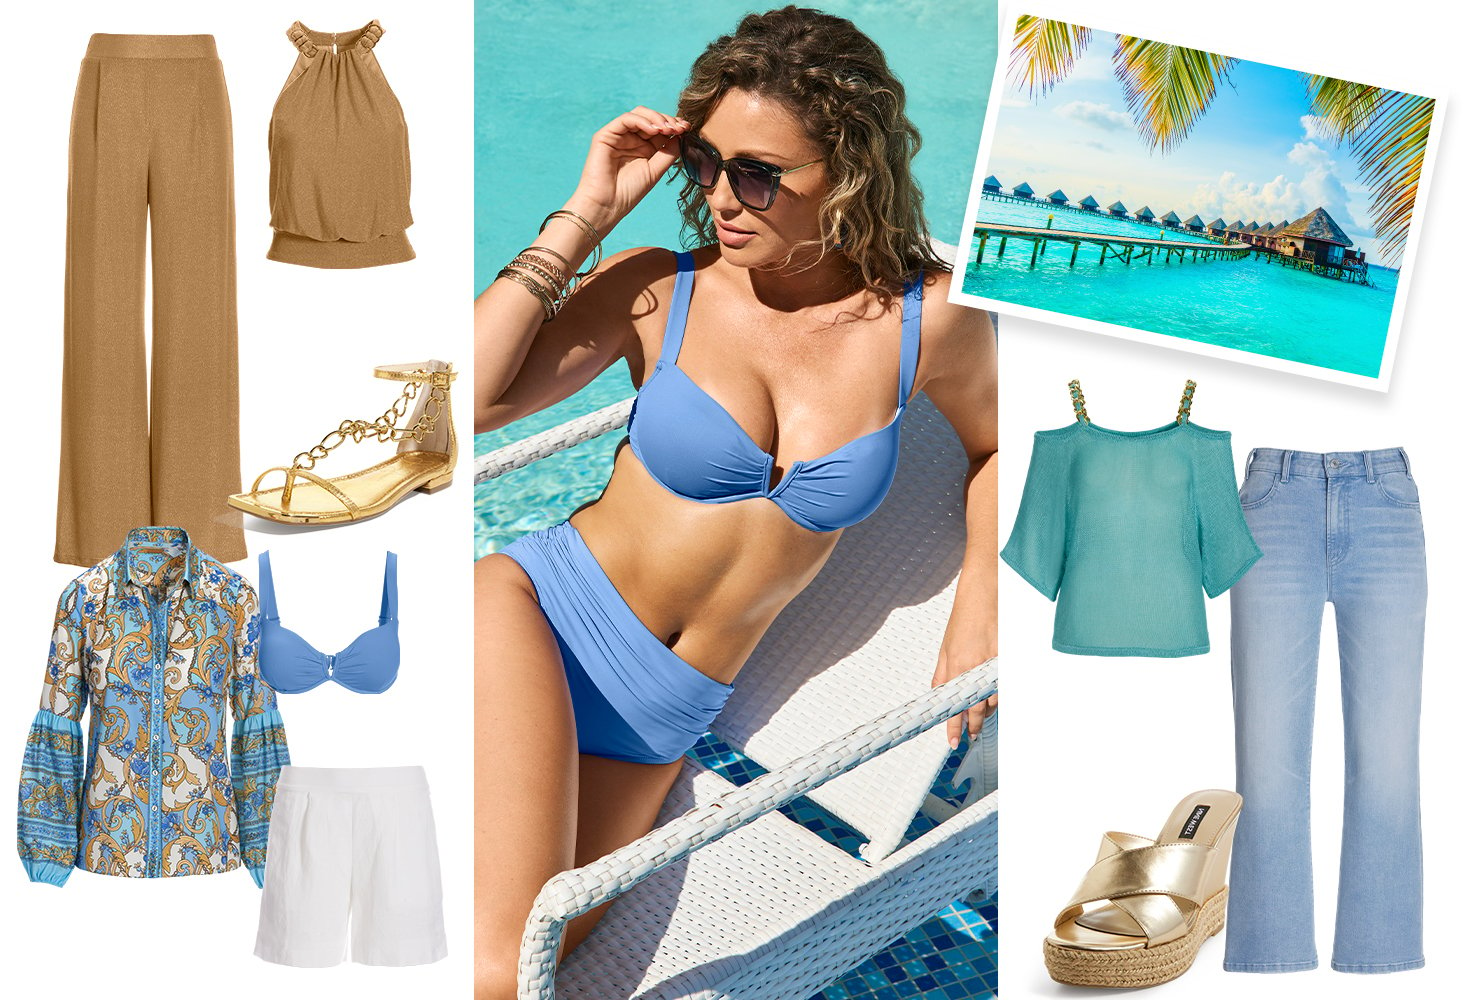 Photo collage of four paradise outfits. Gold metallic halter top with malibu metallic pants and chain detail gold sandal. Blue status print blouse, blue cornflower bikini top and white linen shorts. Models wearing cornflower blue bikini. Last outfit option is cold shoulder chain strap top, light wash jeans and gold metallic heels.